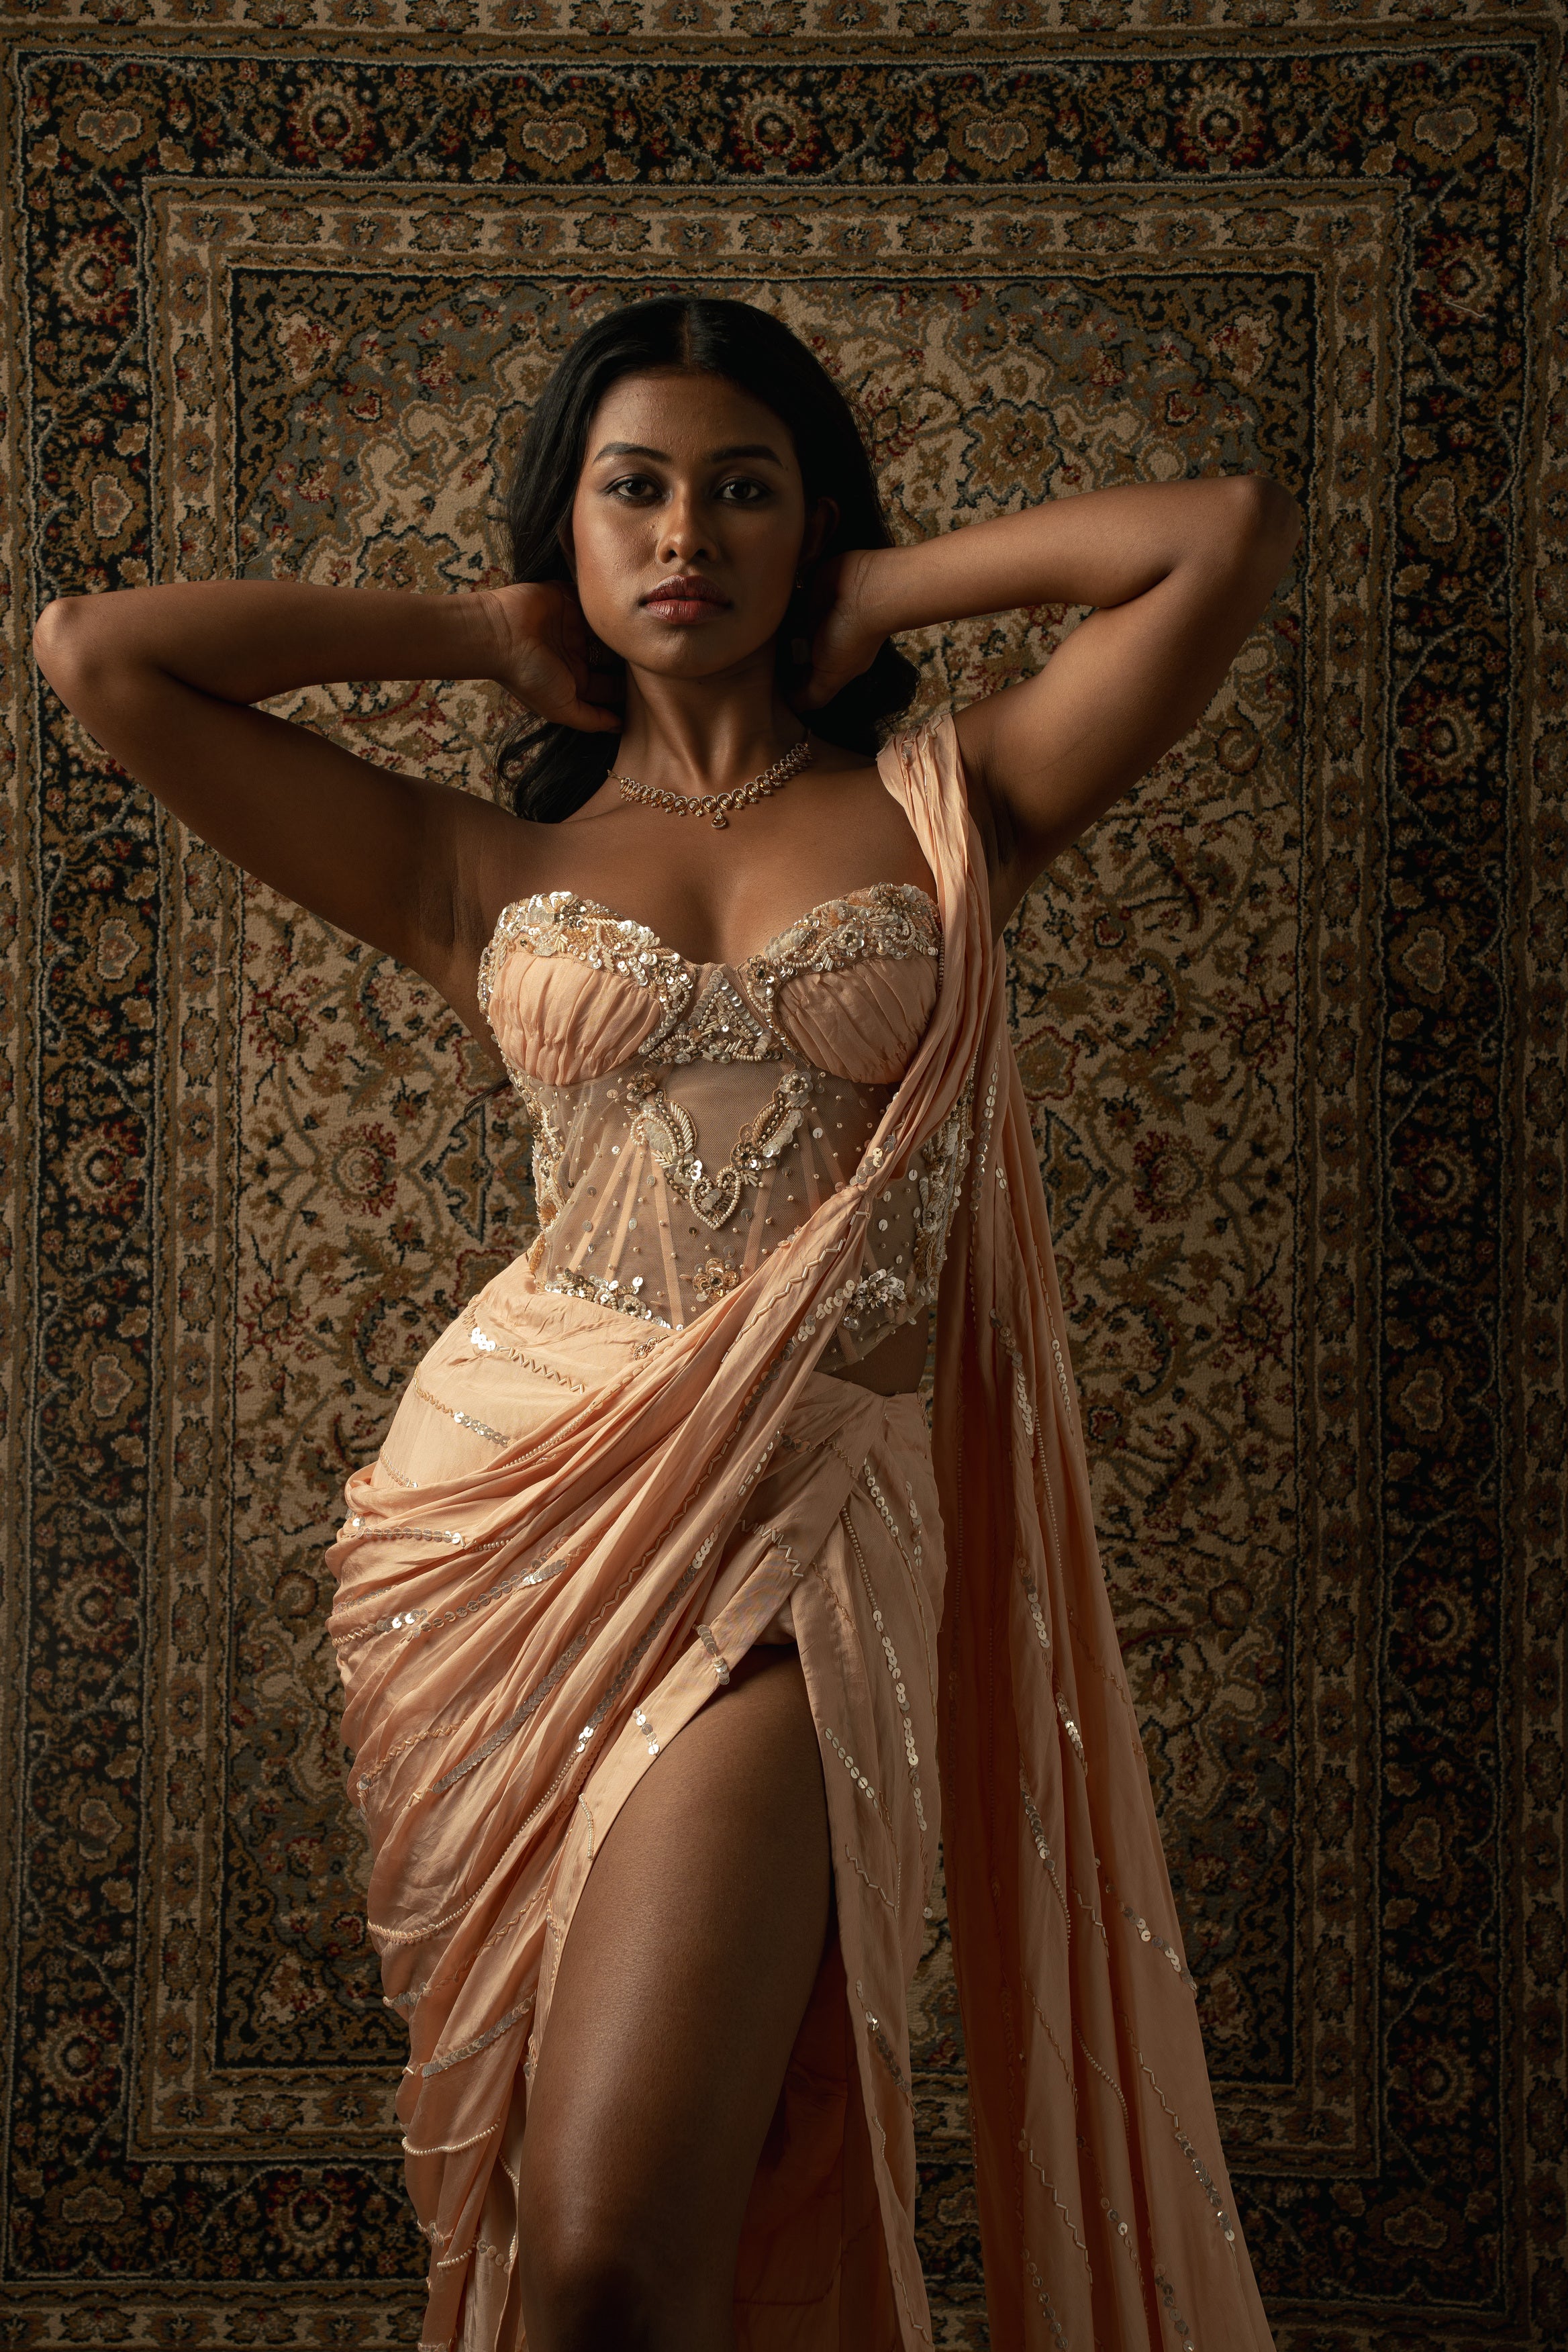 Radiate sophistication: This peach satin silk saree and net blouse ensemble exudes timeless charm and grace.